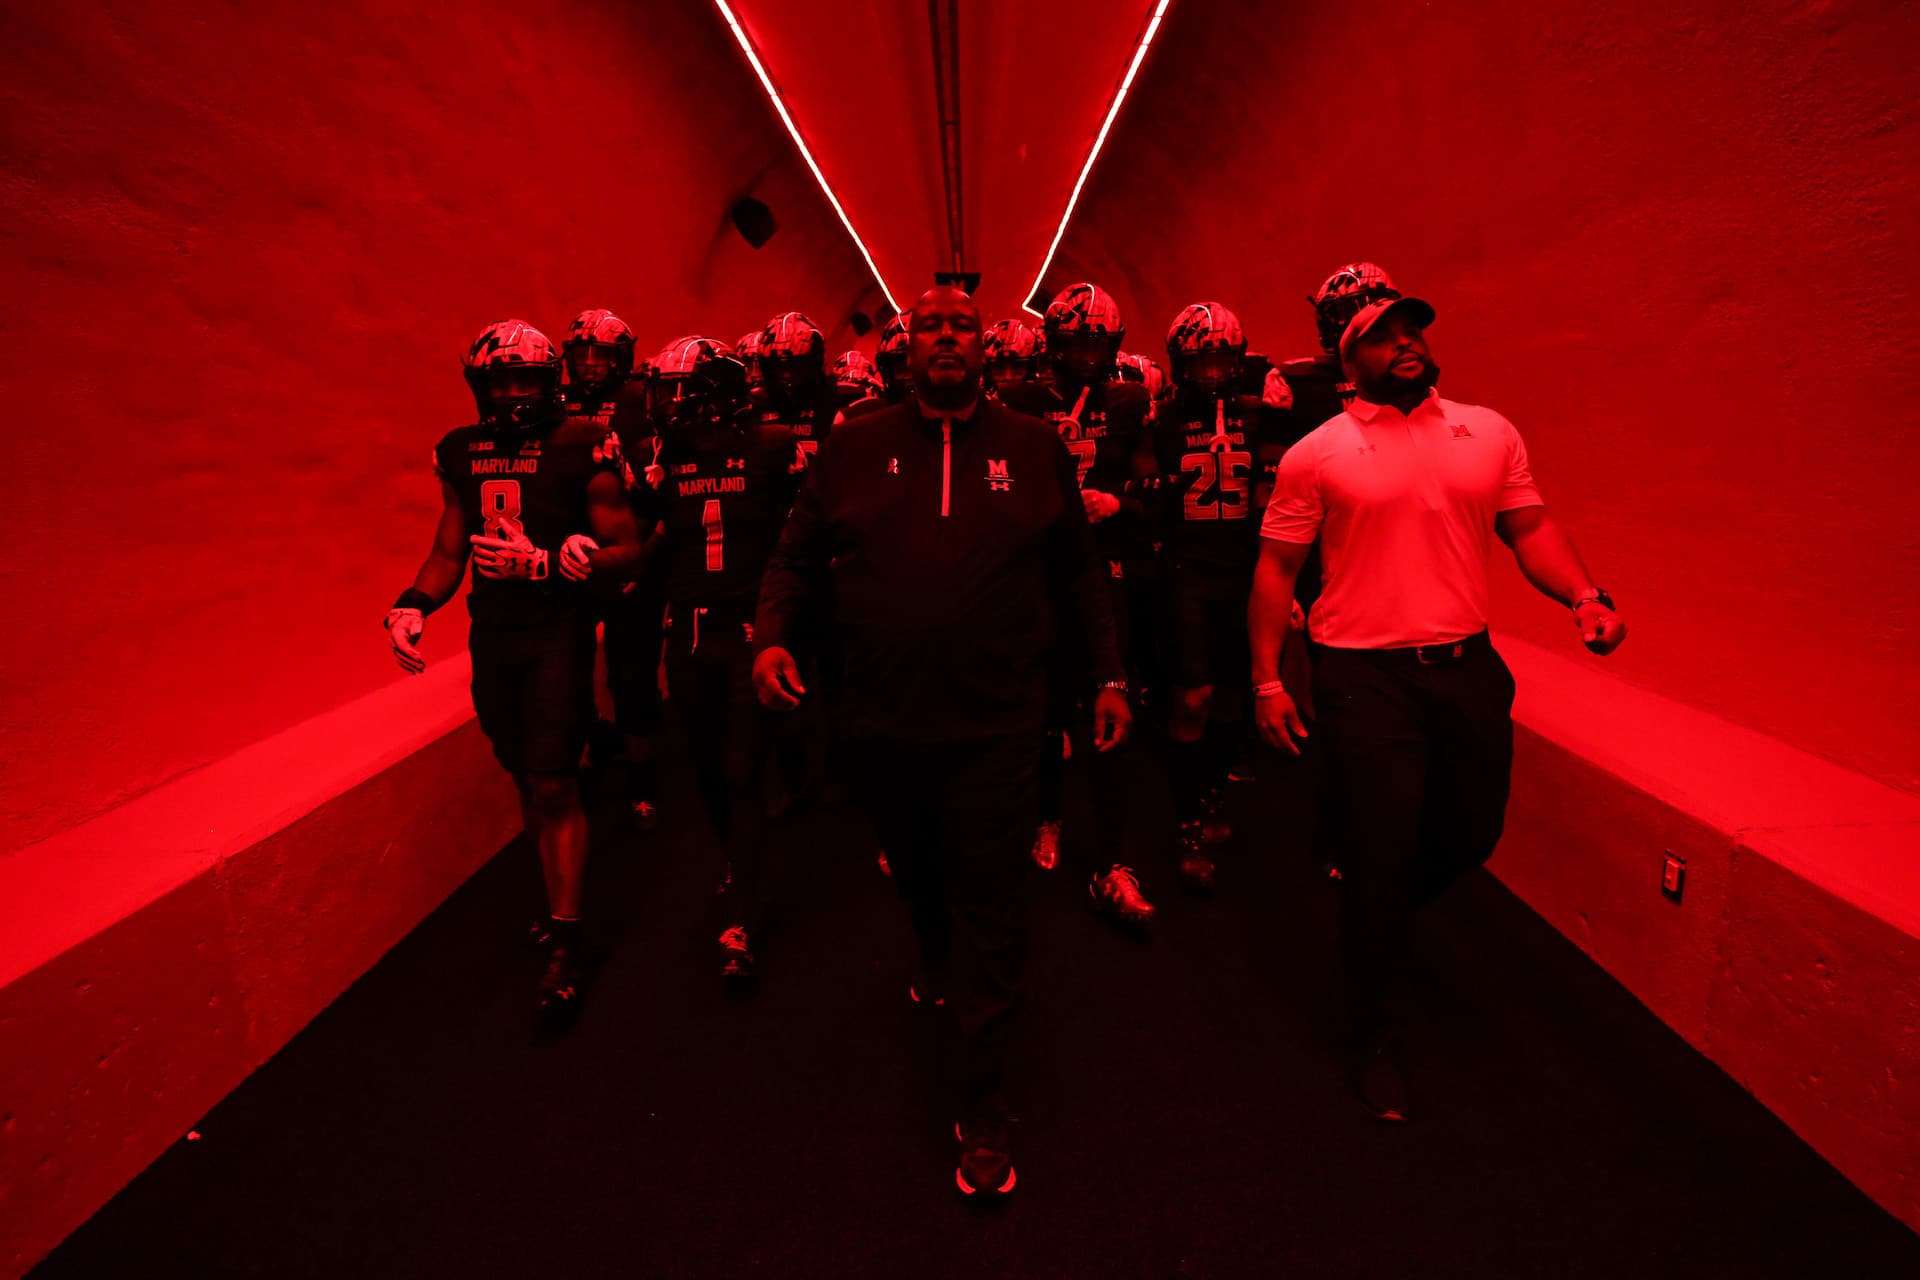 The Maryland Football team walks down the tunnel with Coach Locksley under red lights.